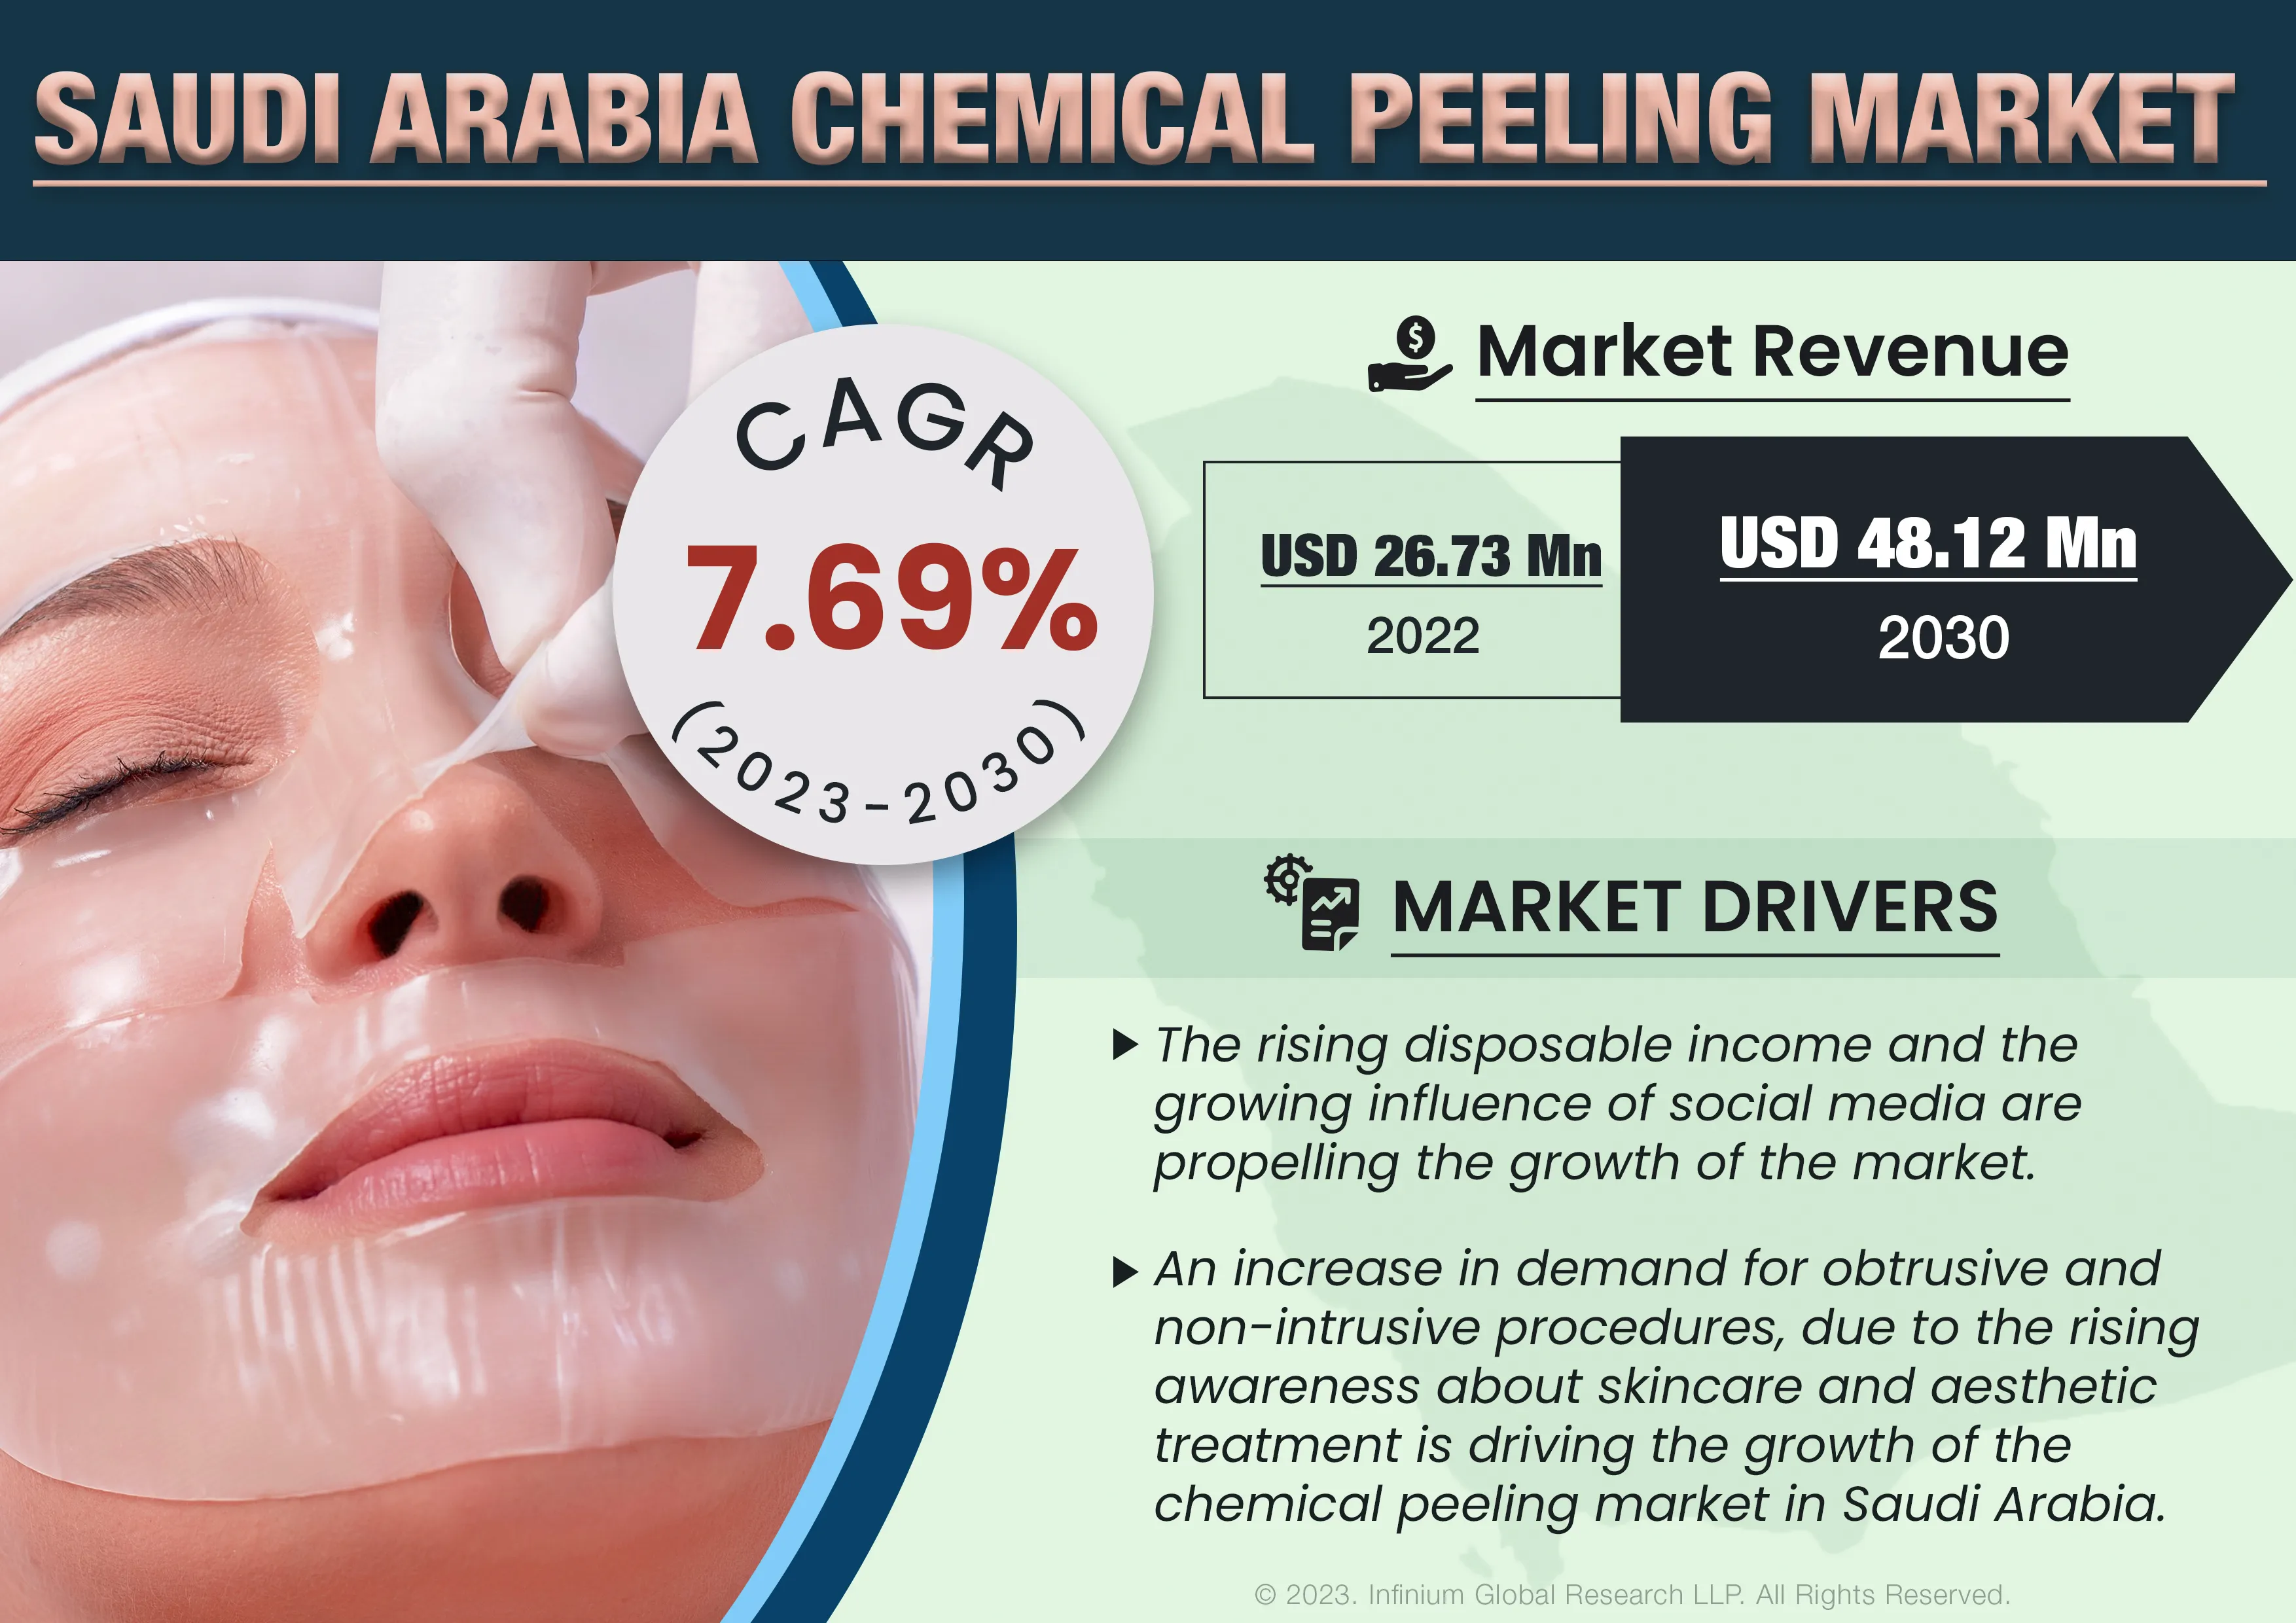 Saudi Arabia Chemical Peeling Market was Valued at USD 26.73 Million in 2022 and is Expected to Reach USD 48.12 Million by 2030 and Grow at a CAGR of 7.69% Over the Forecast Period.